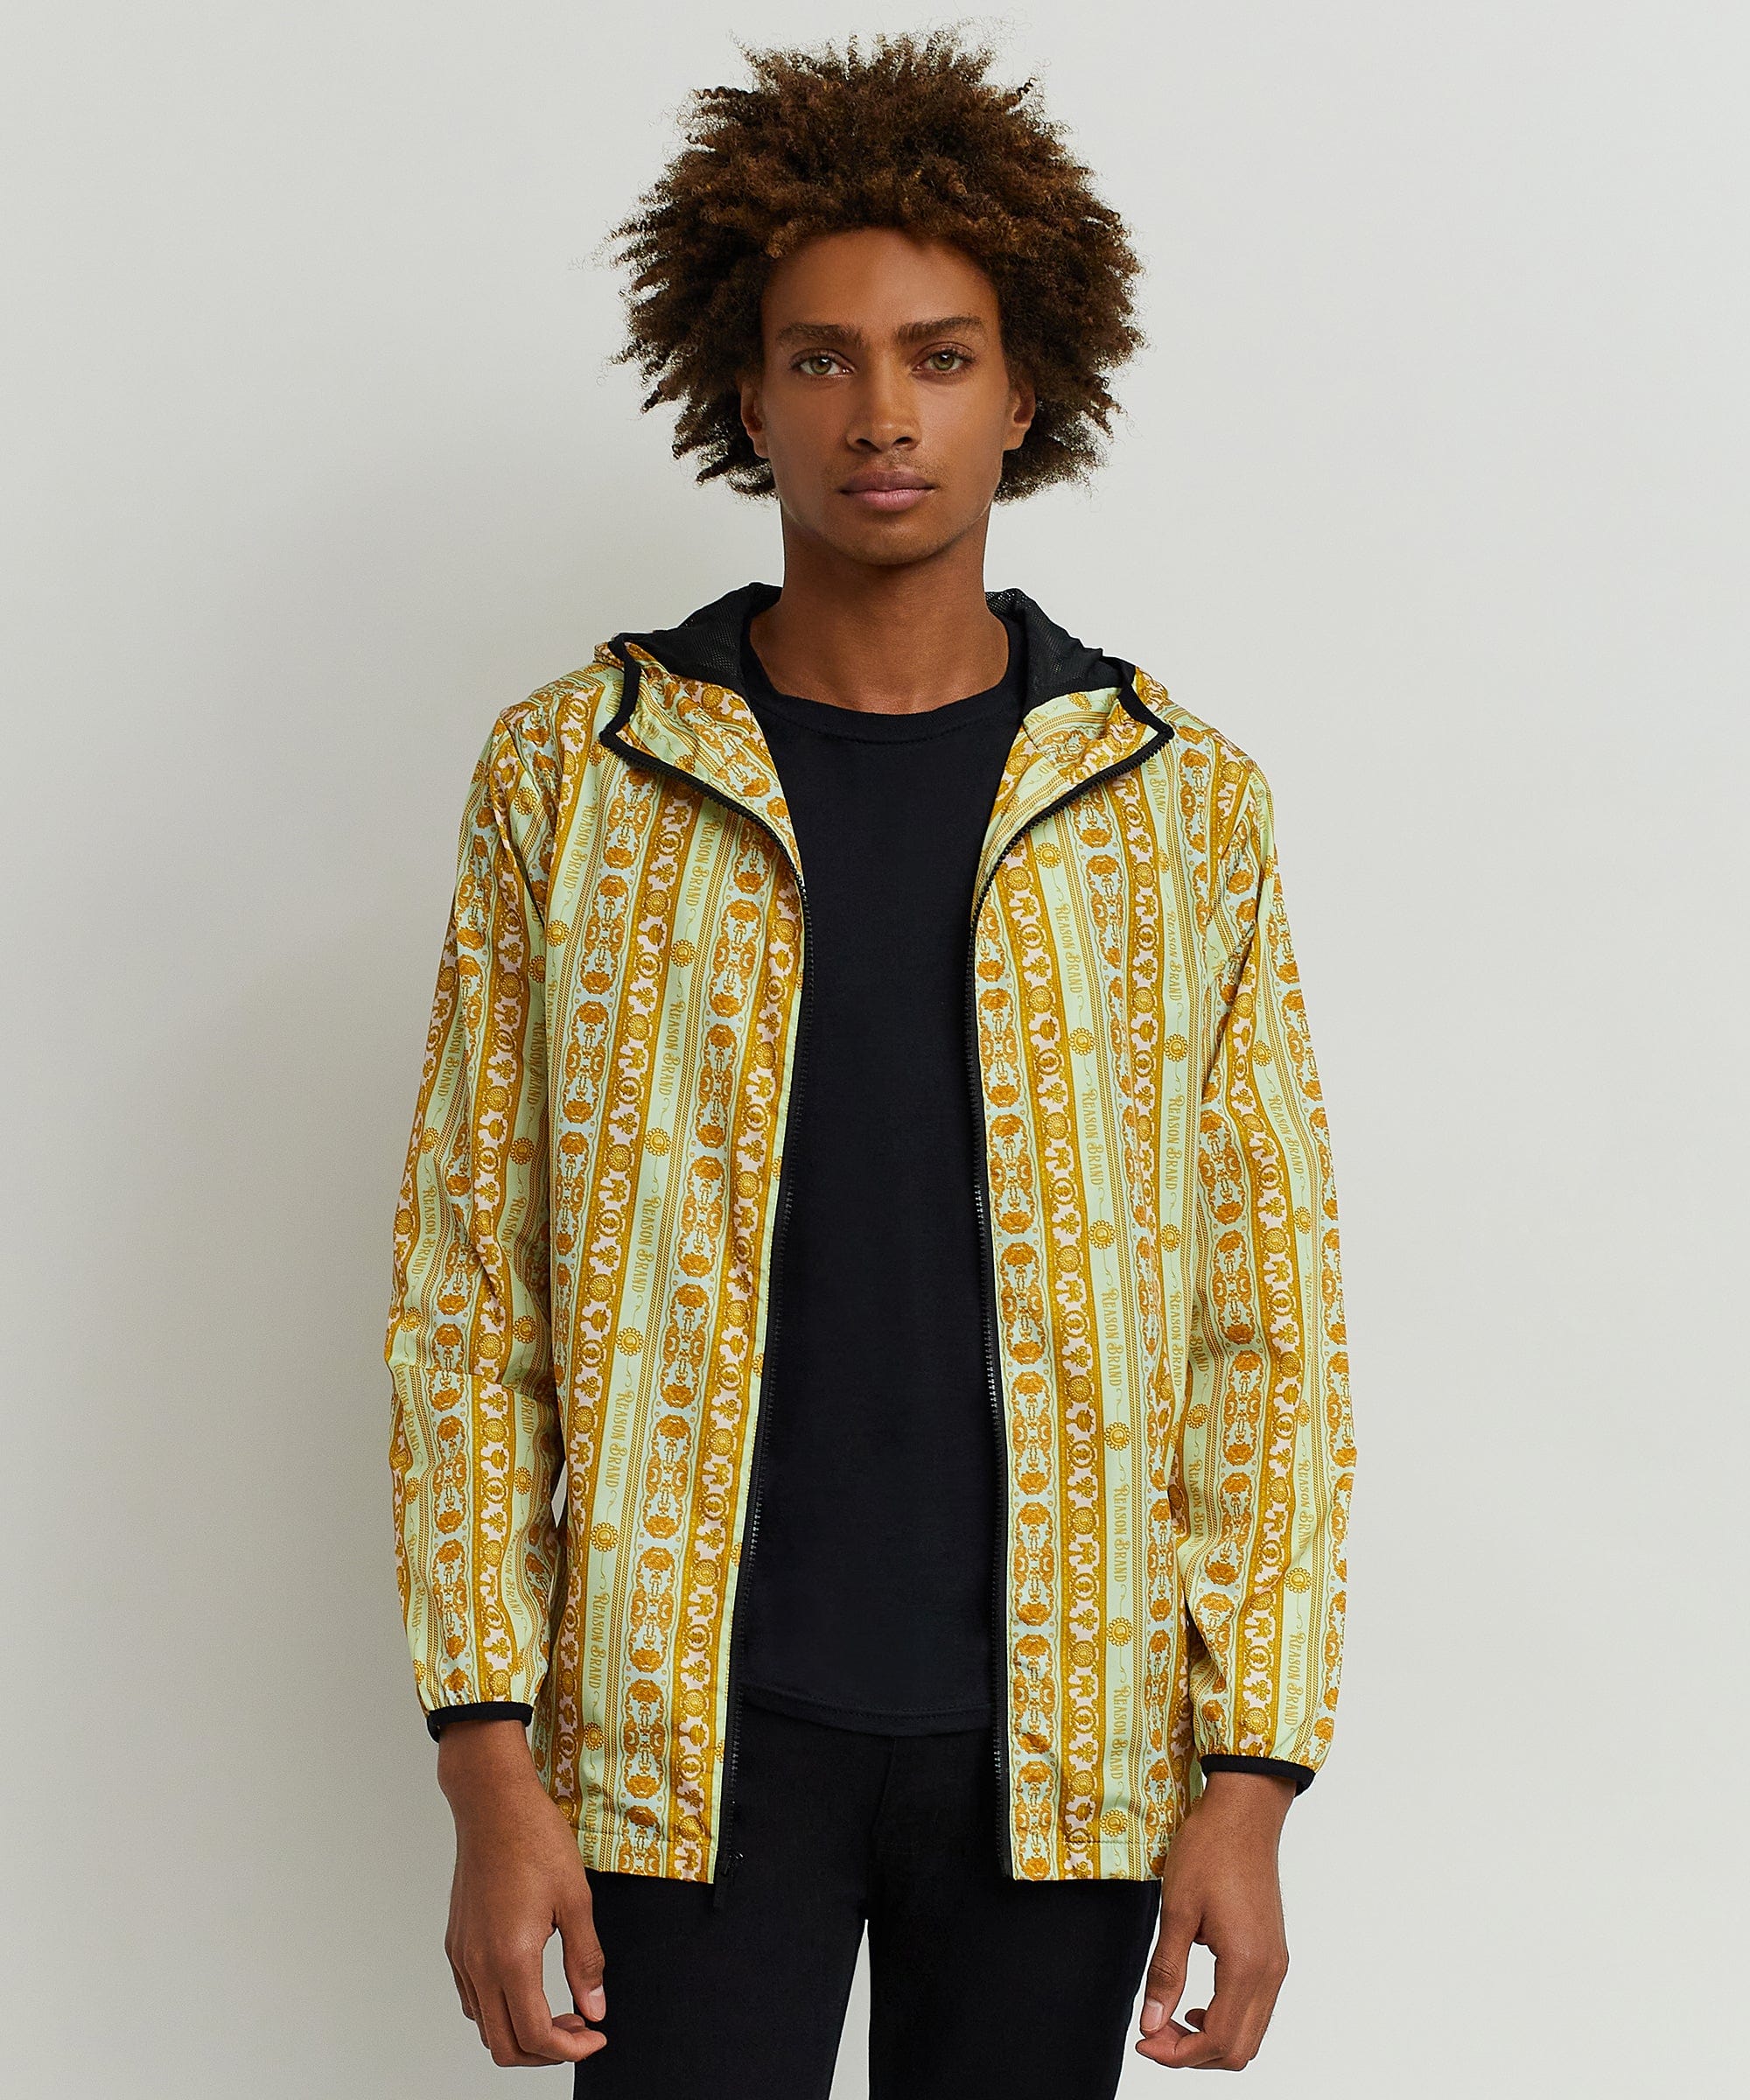 Royal Chains Allover Print Hooded Jacket